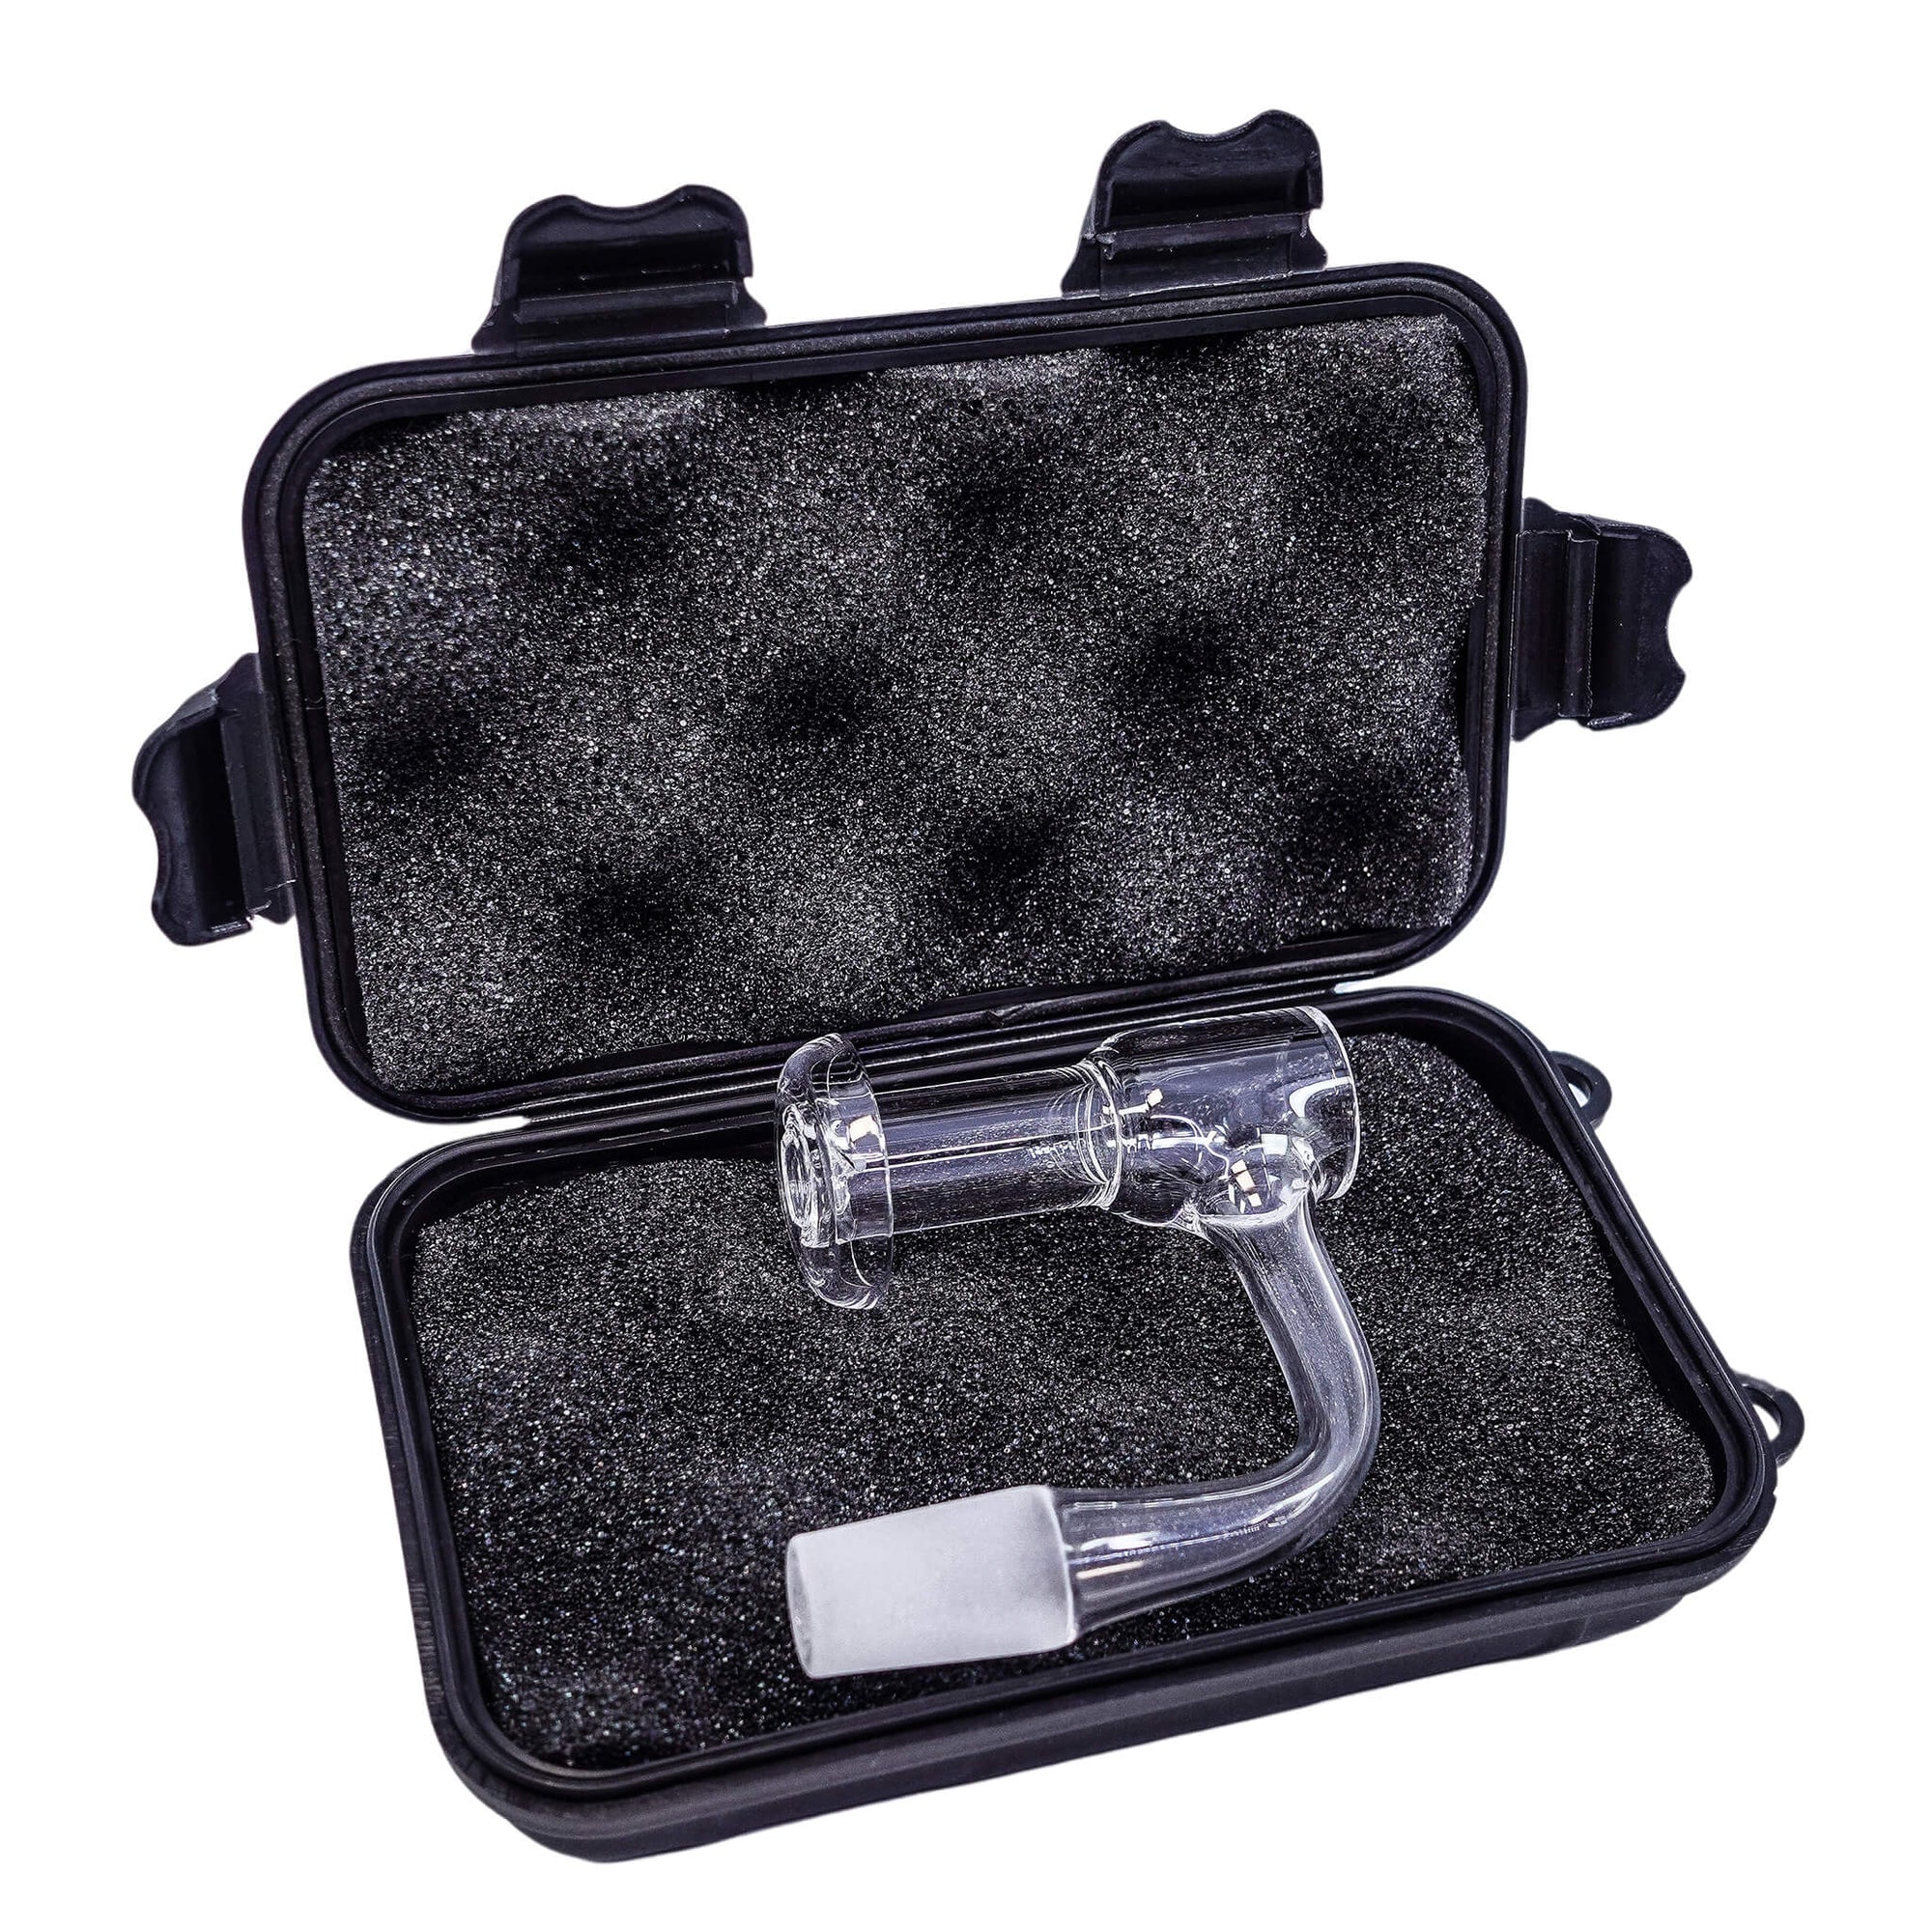 Small Hard Shell Banger Case | Open Angled View With Terp Slurper In Case | the dabbing specialists